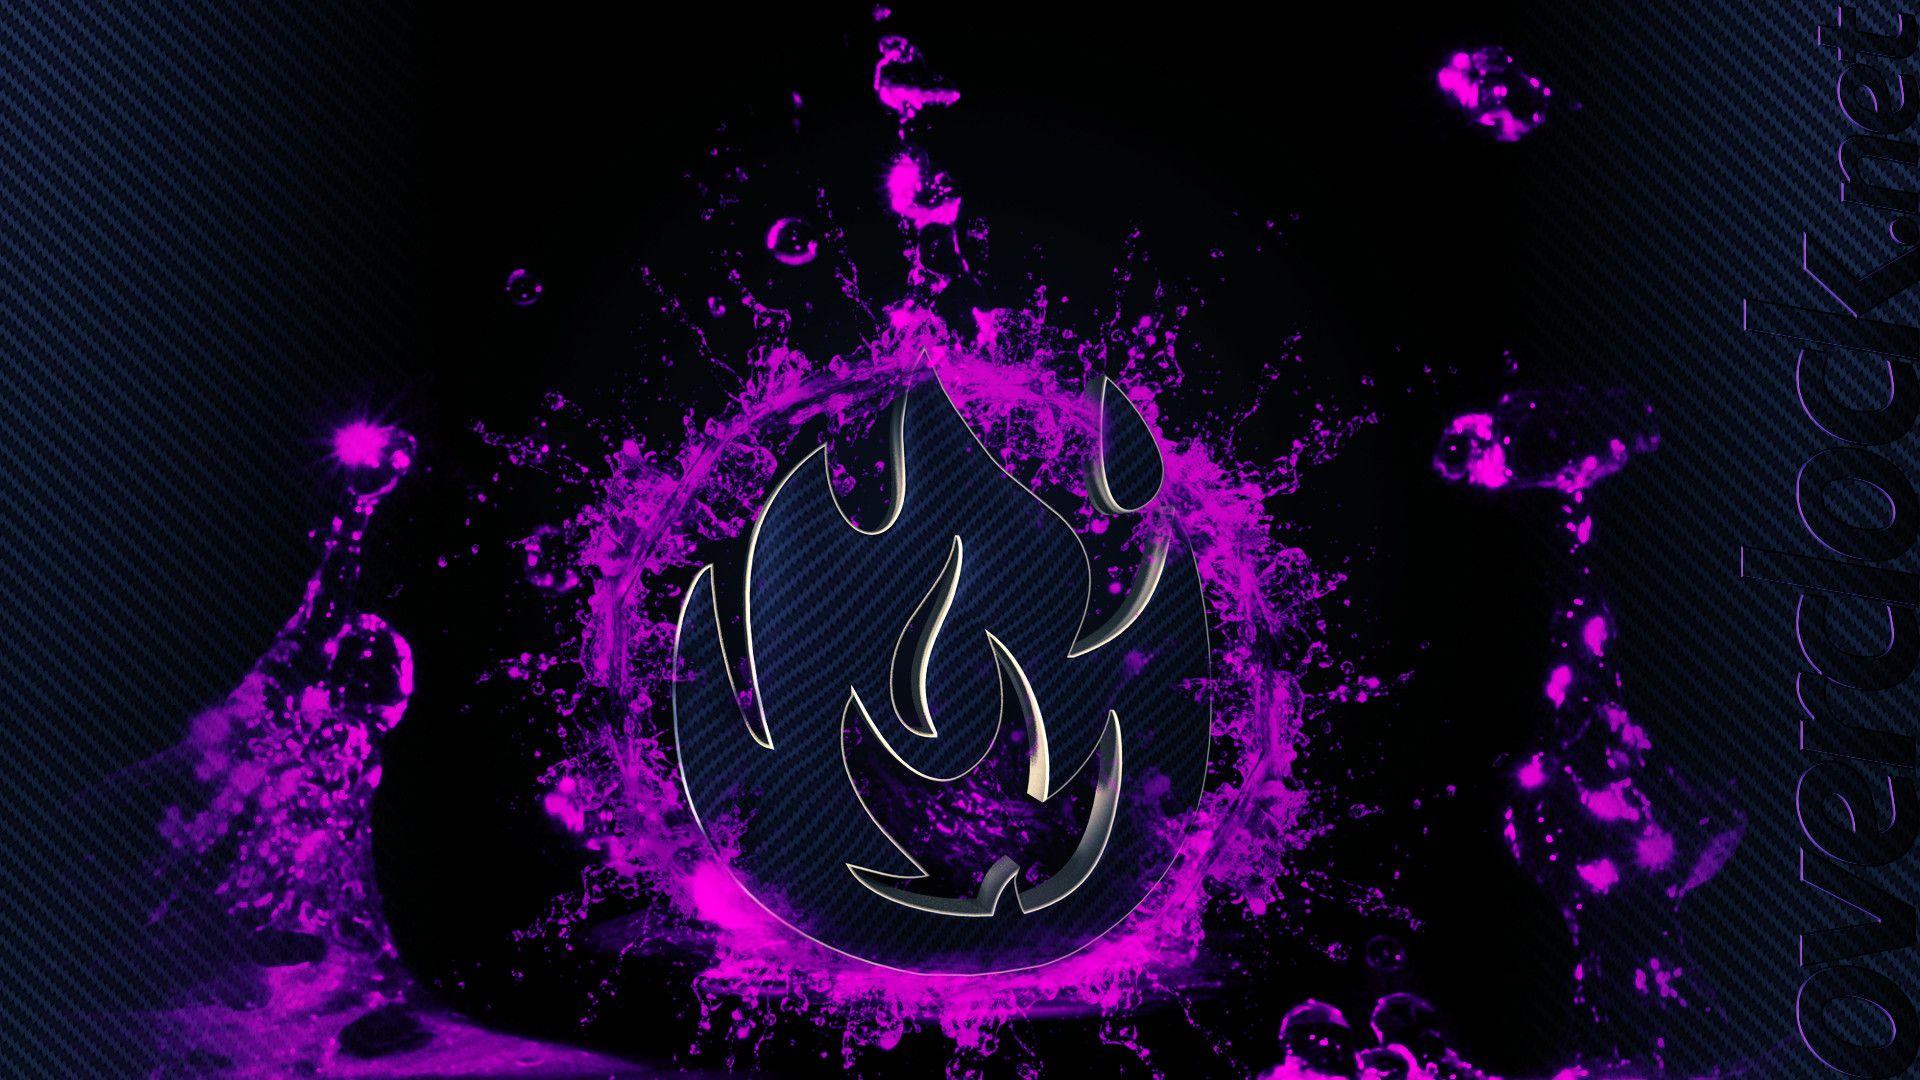 razer gif  4k wallpapers for pc, Purple wallpaper hd, Gaming wallpapers